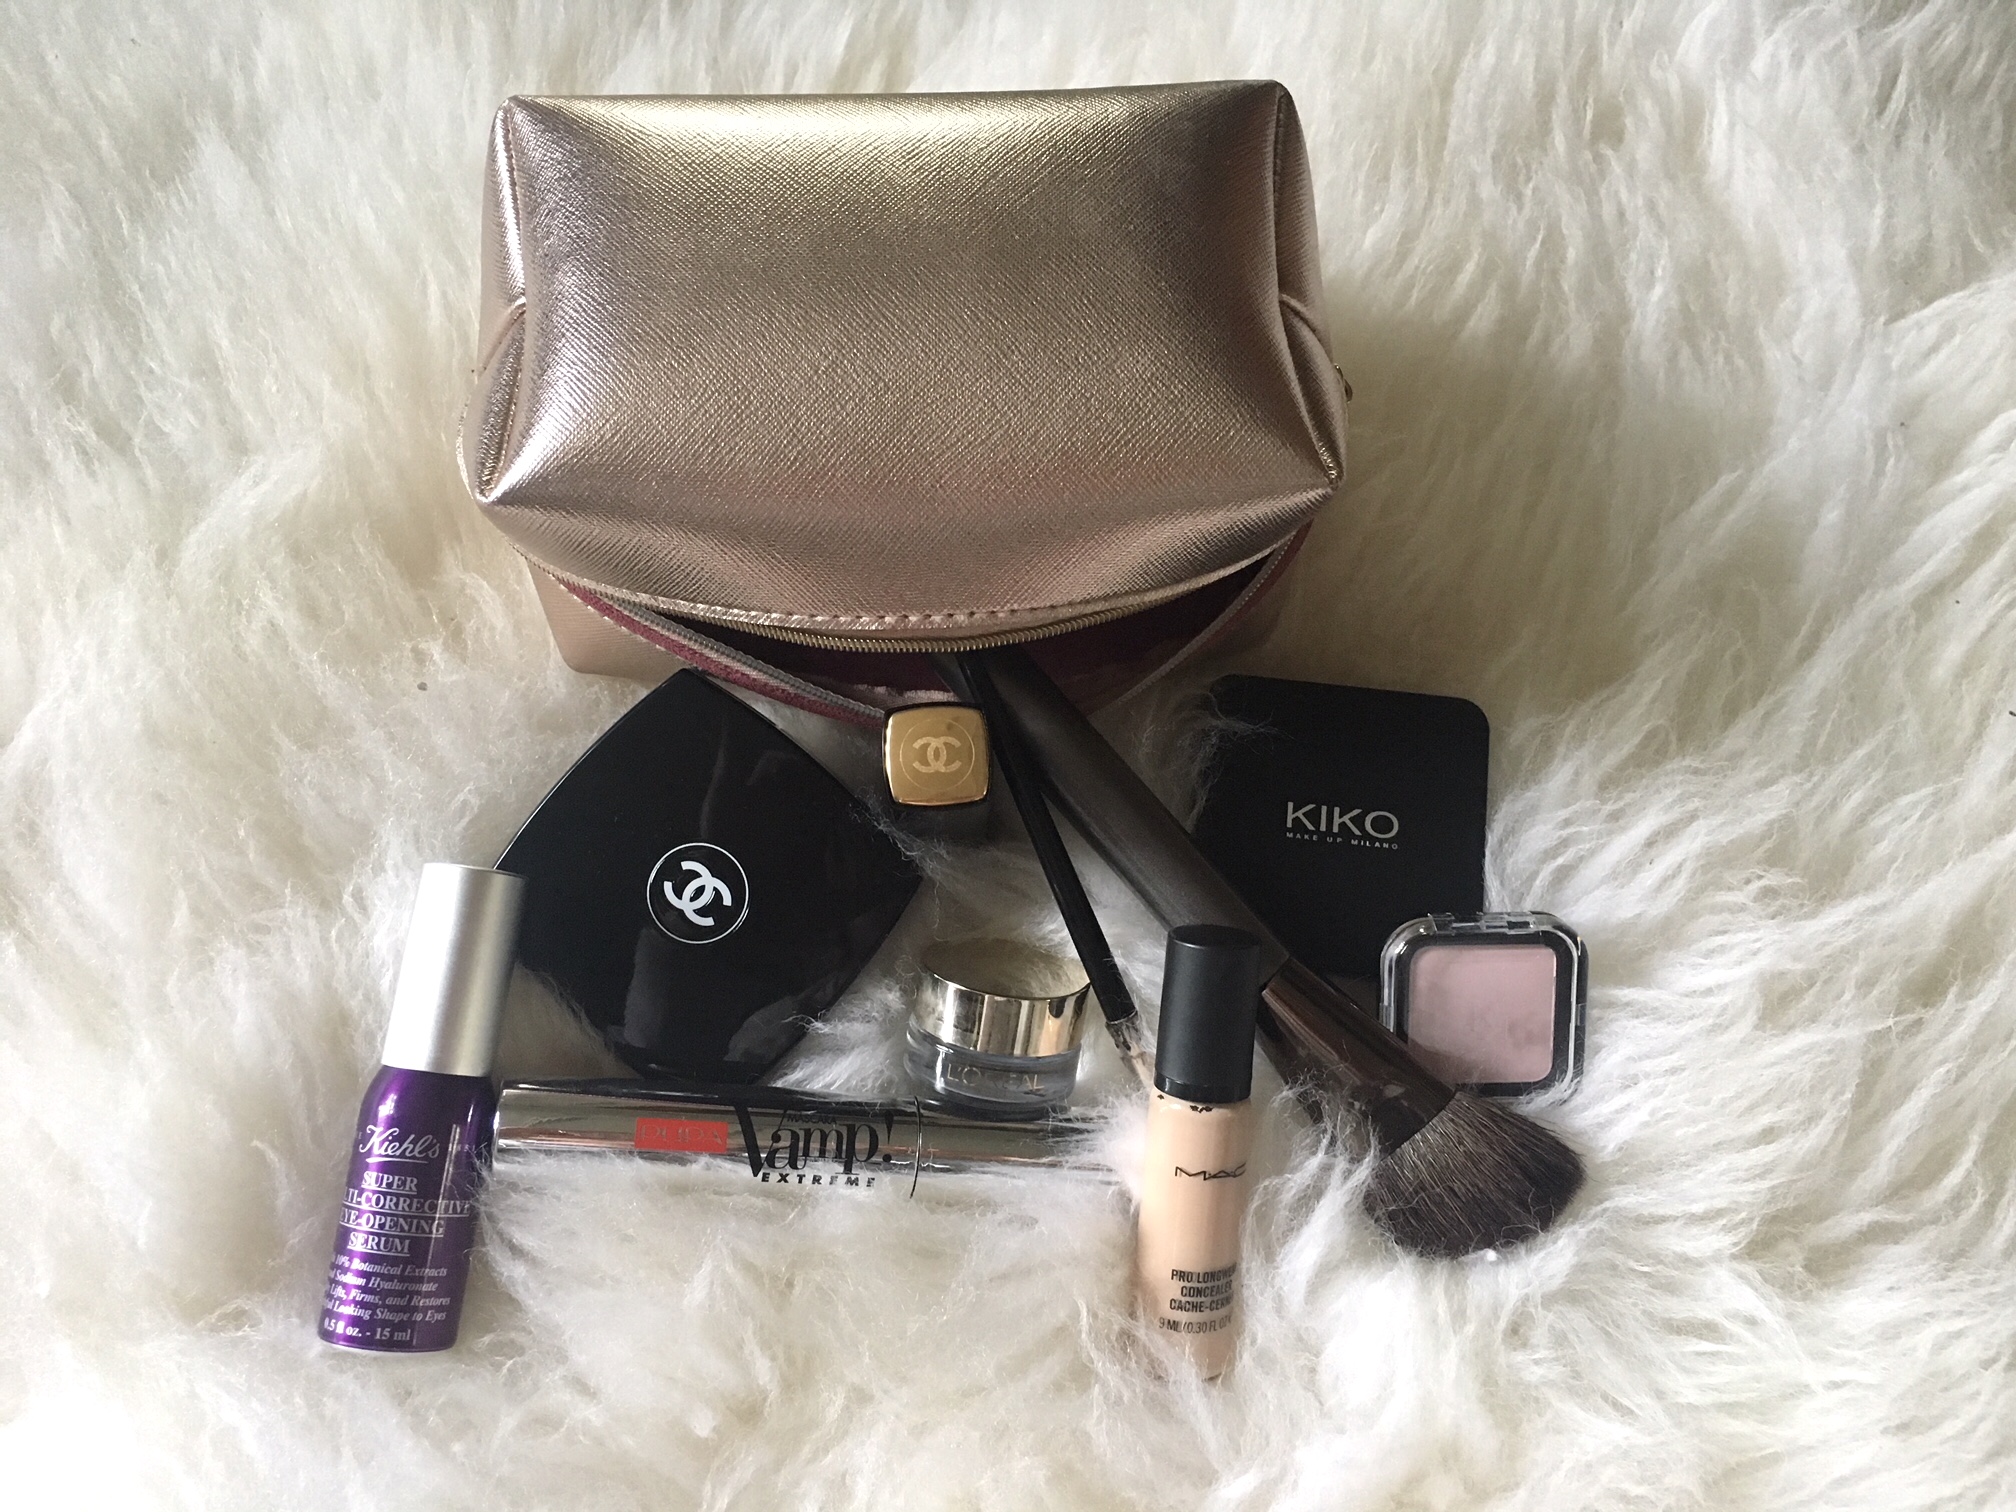 What's In Your Beauty Bag? - VIBES